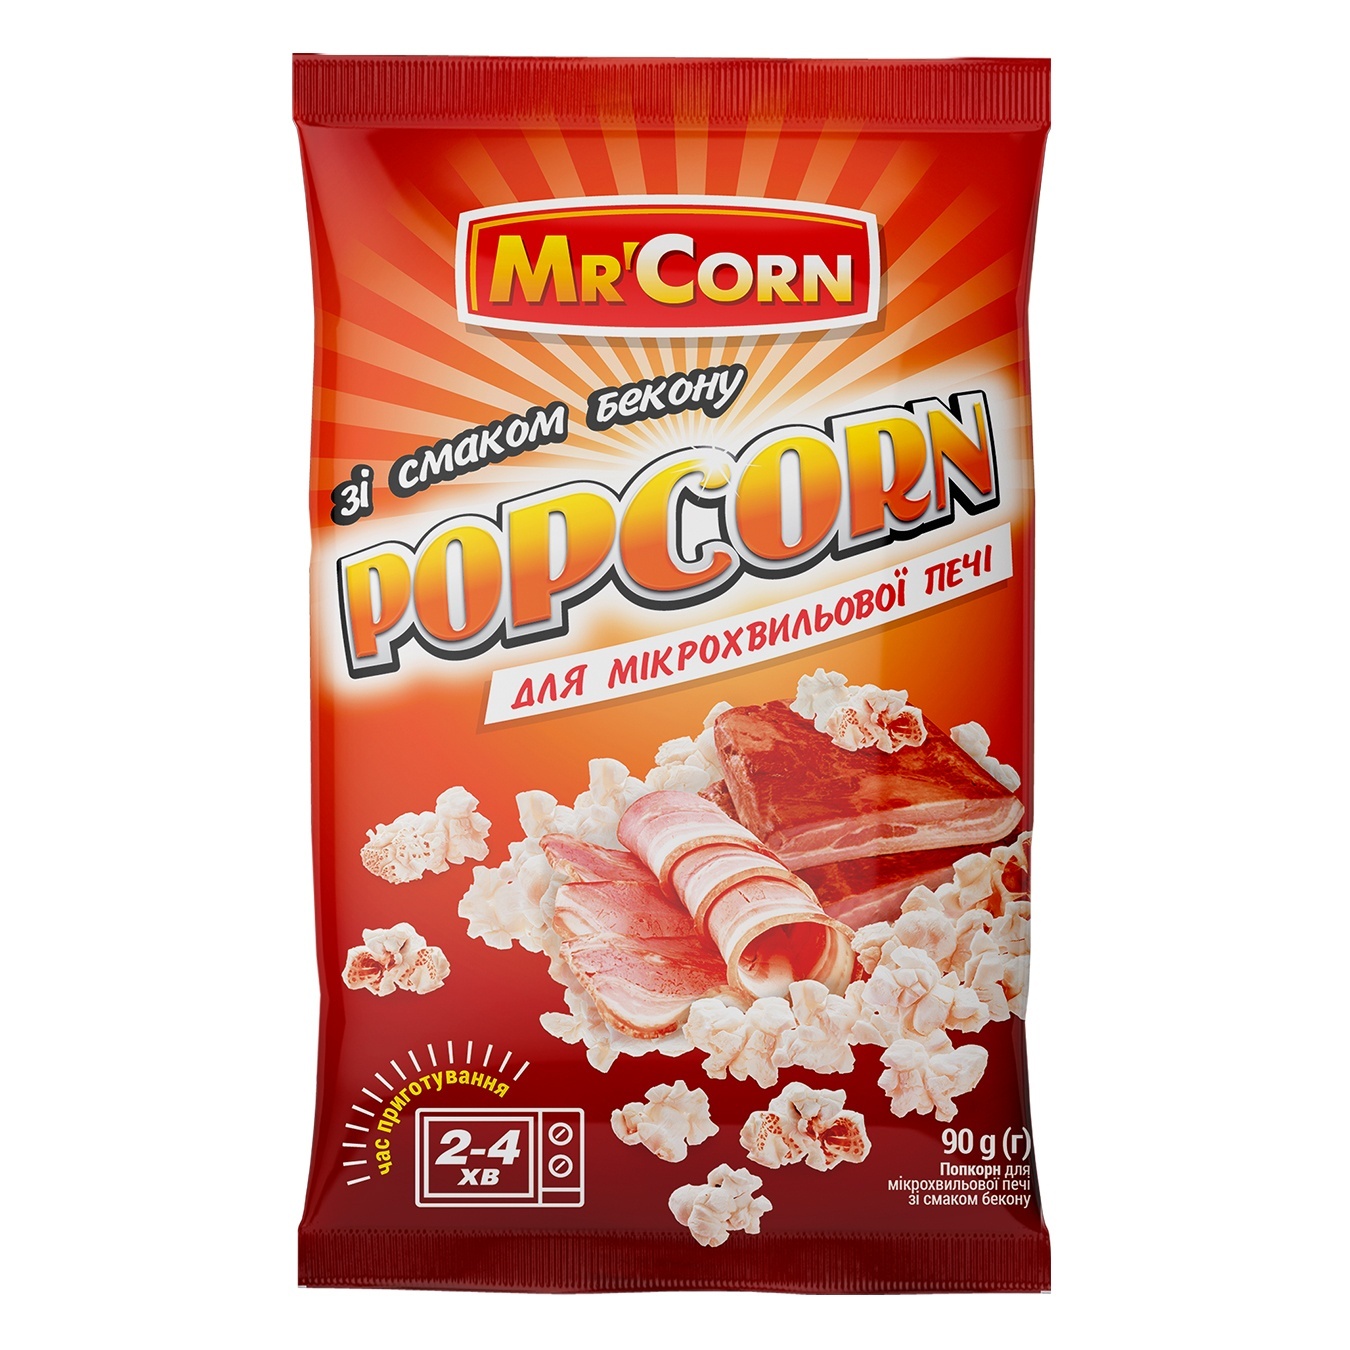 Mr'Corn With Bacon Flavor Microwave Popcorn 90g